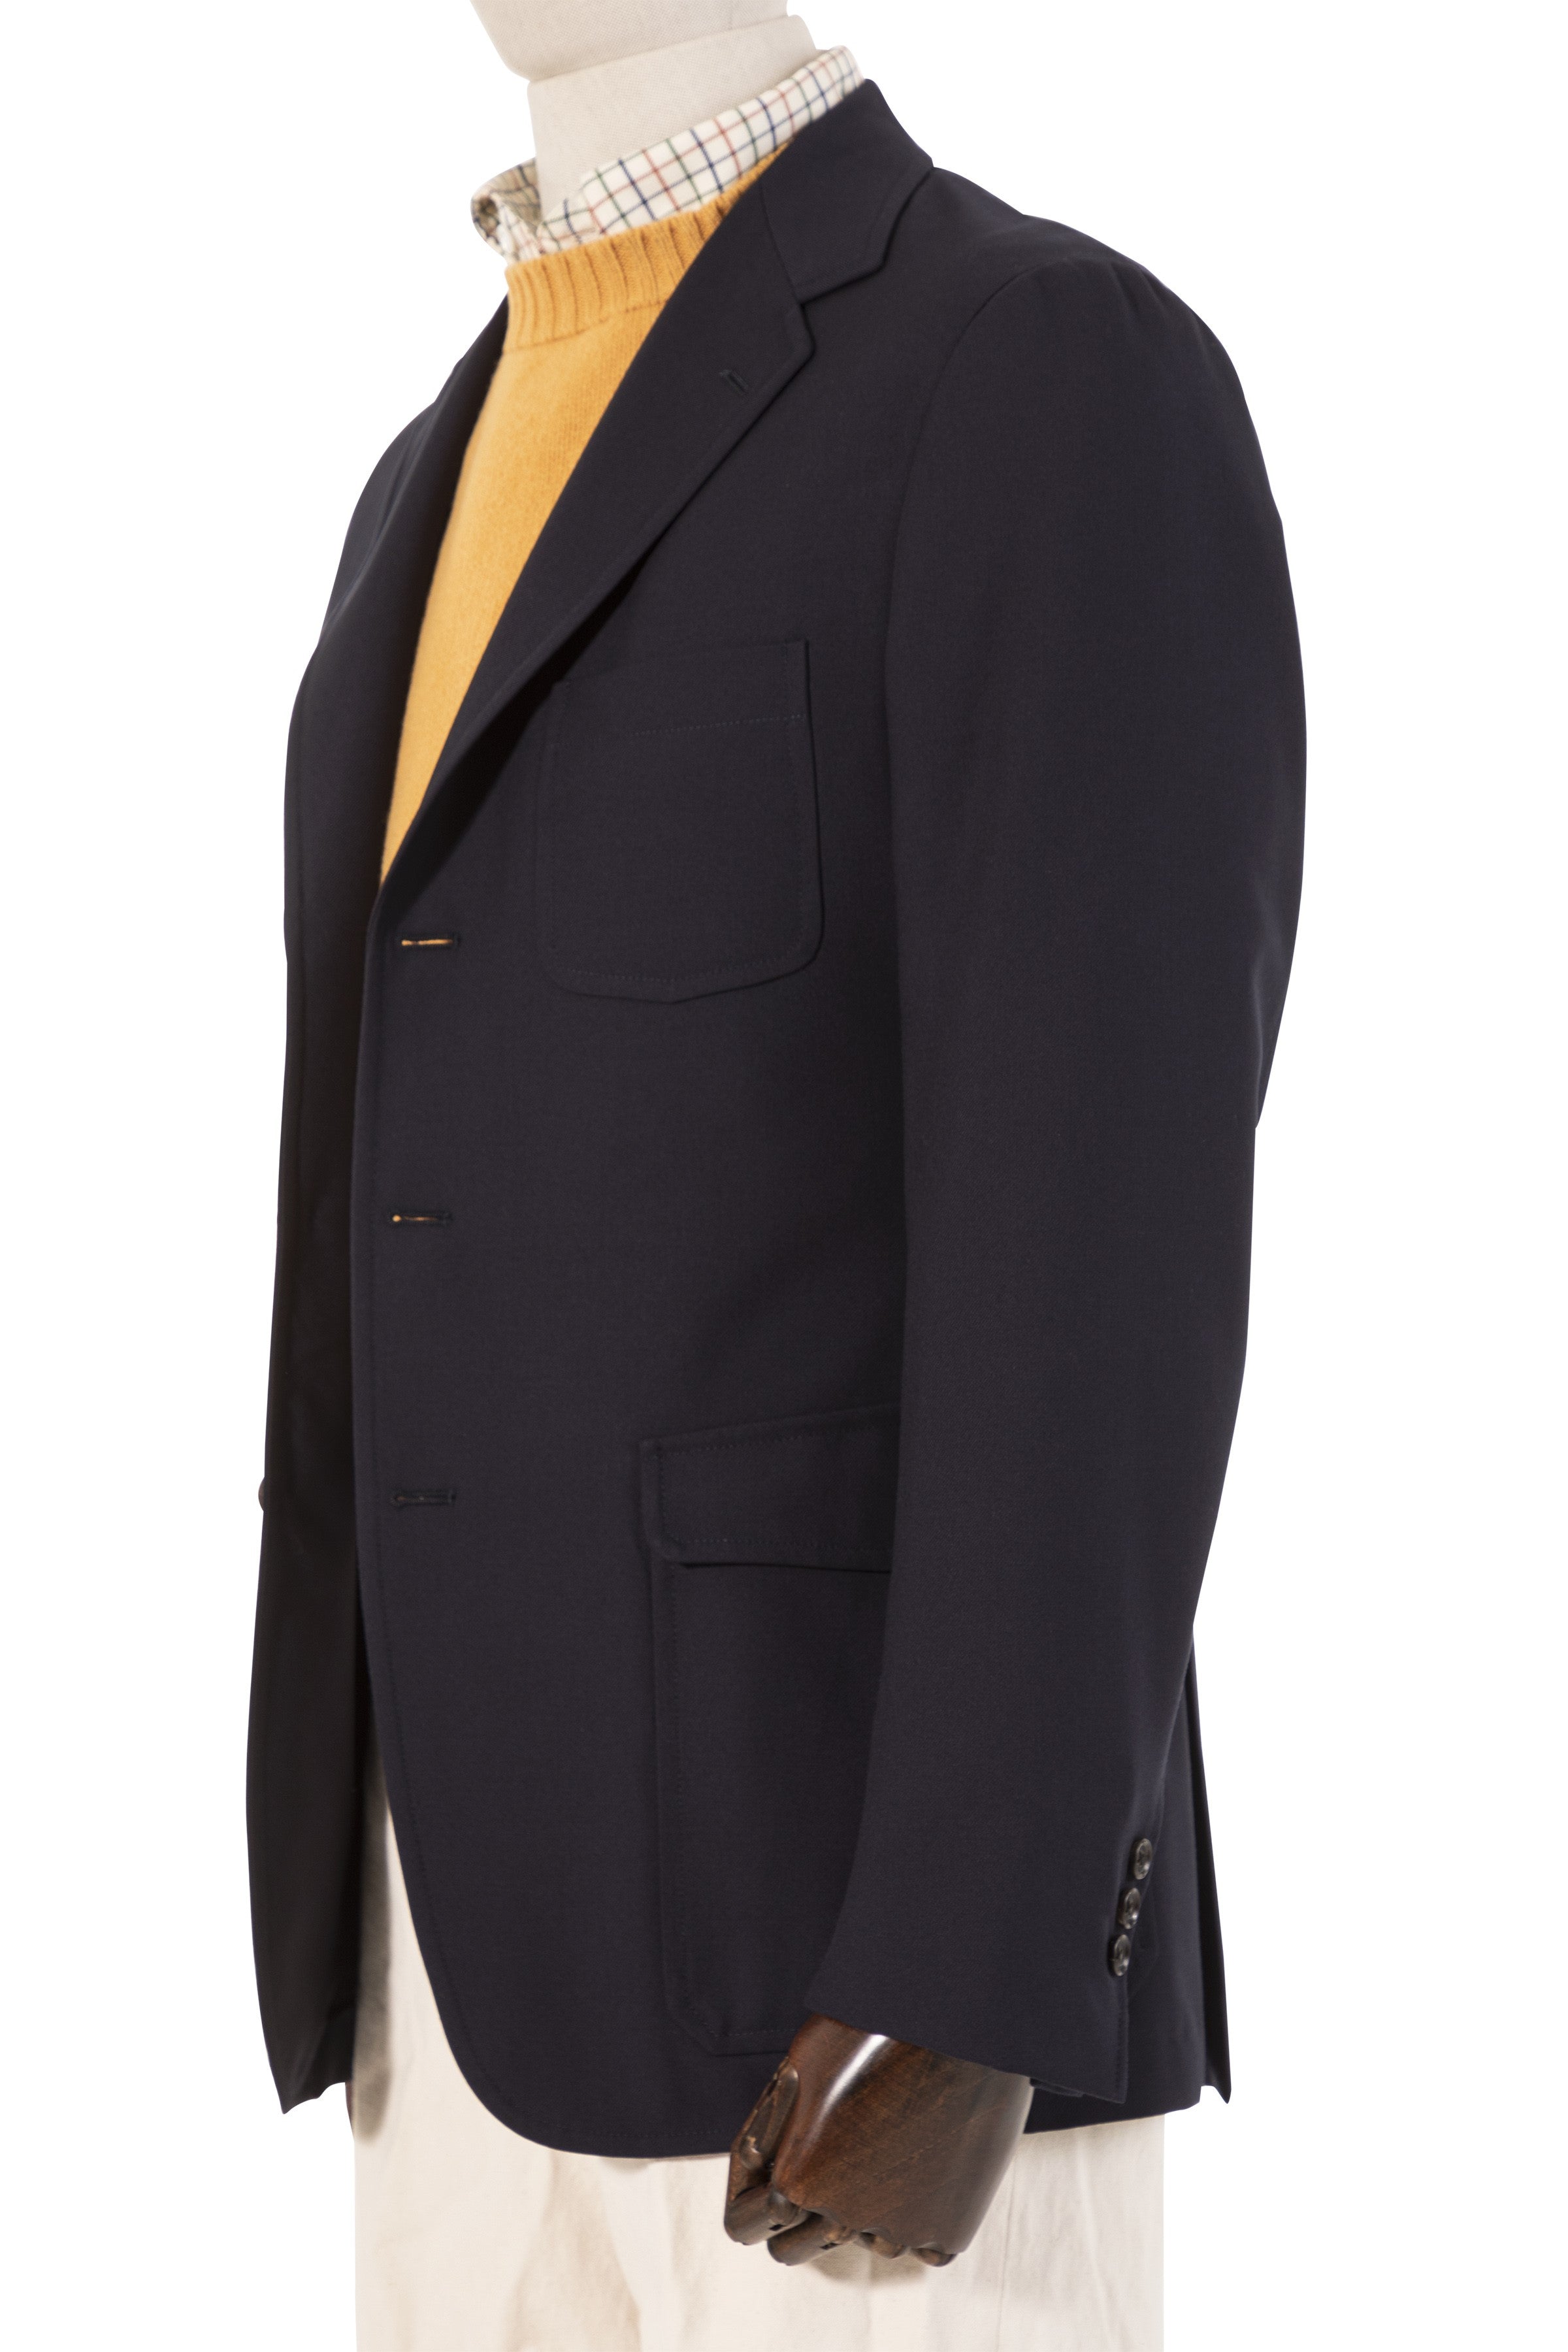 The Armoury by Ring Jacket Model 11 Armoury 10th Anniversary Decade Navy Twill Wool Sport Coat